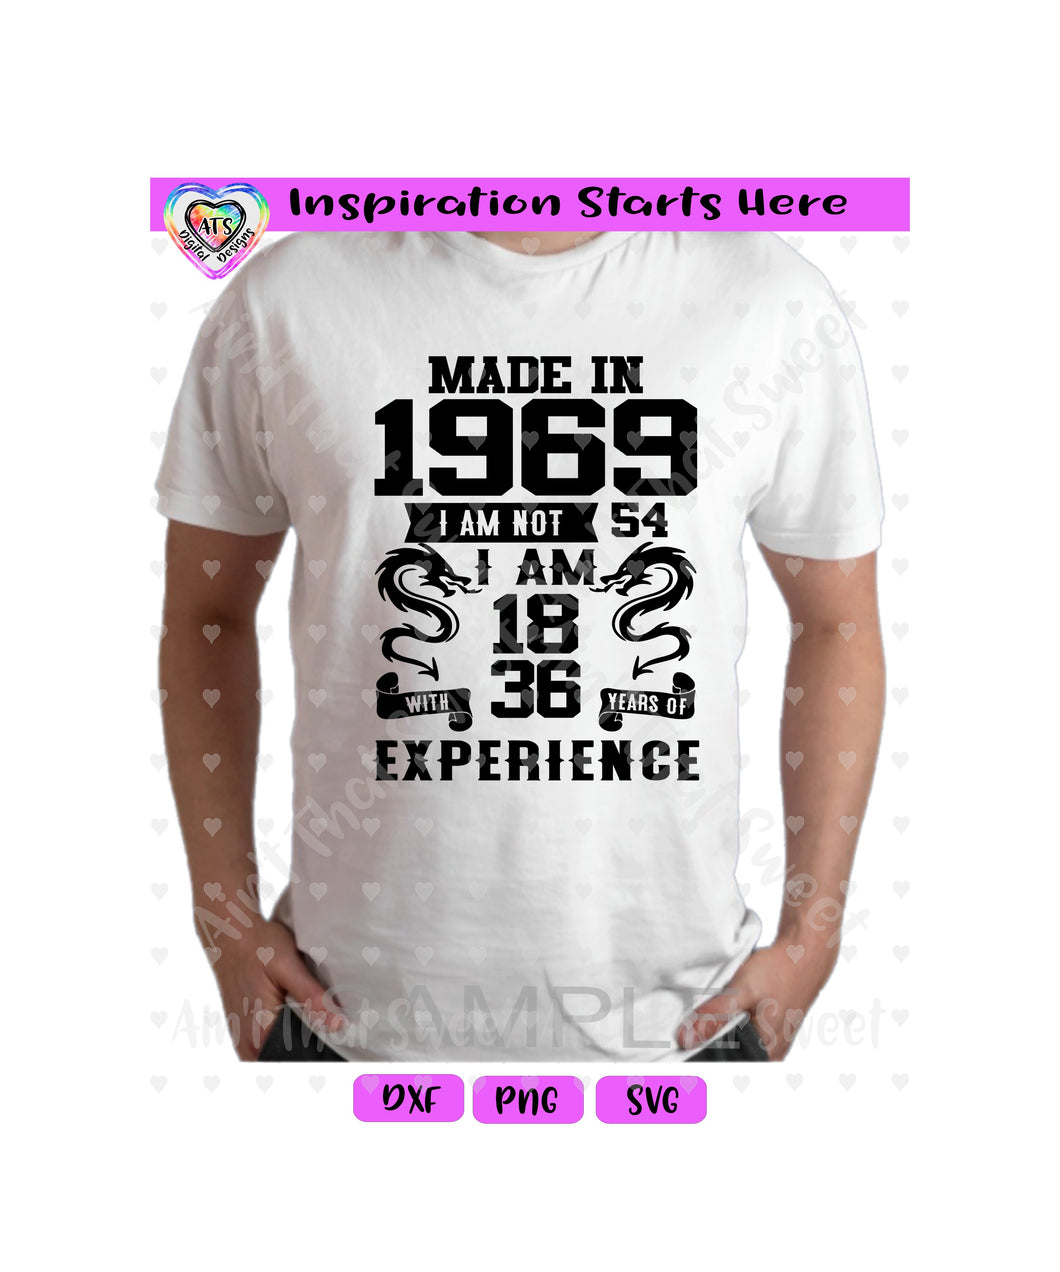 Made In 1969 | I Am Not 54 | I'm 18 With 36 Years Experience (Based on 2023) - Transparent PNG SVG DXF - Silhouette, Cricut, ScanNCut